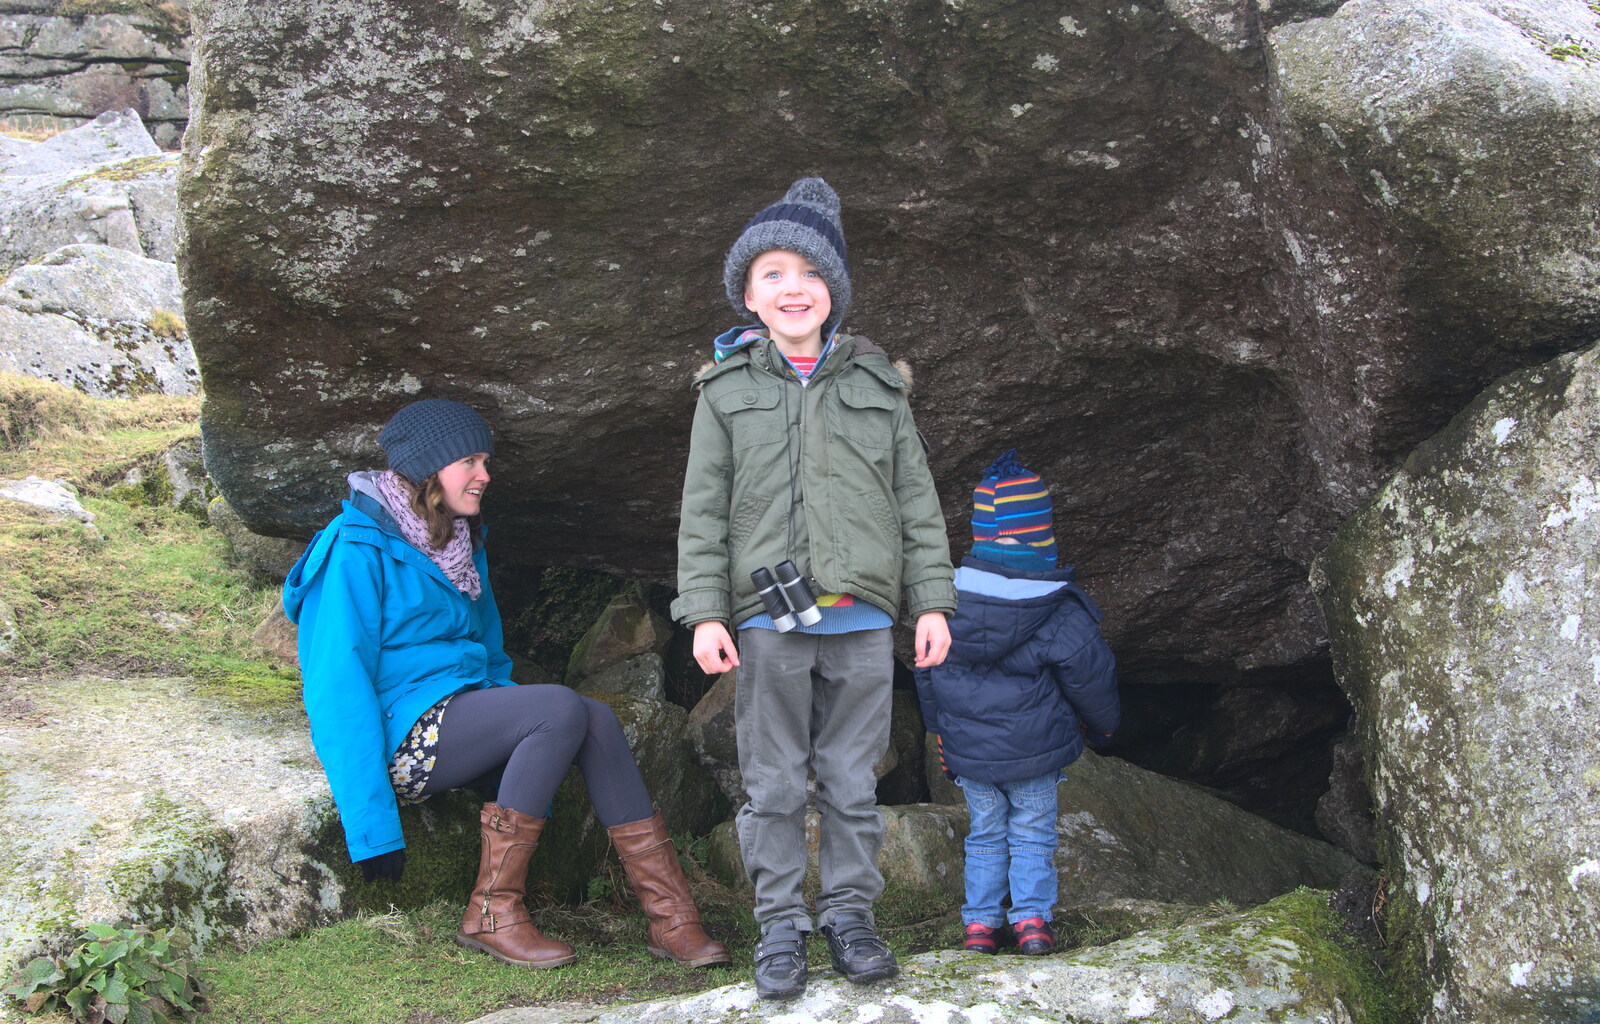 We pause in a small boulder-cave for a few moments from A Trip to Grandma J's, Spreyton, Devon - 18th February 2015